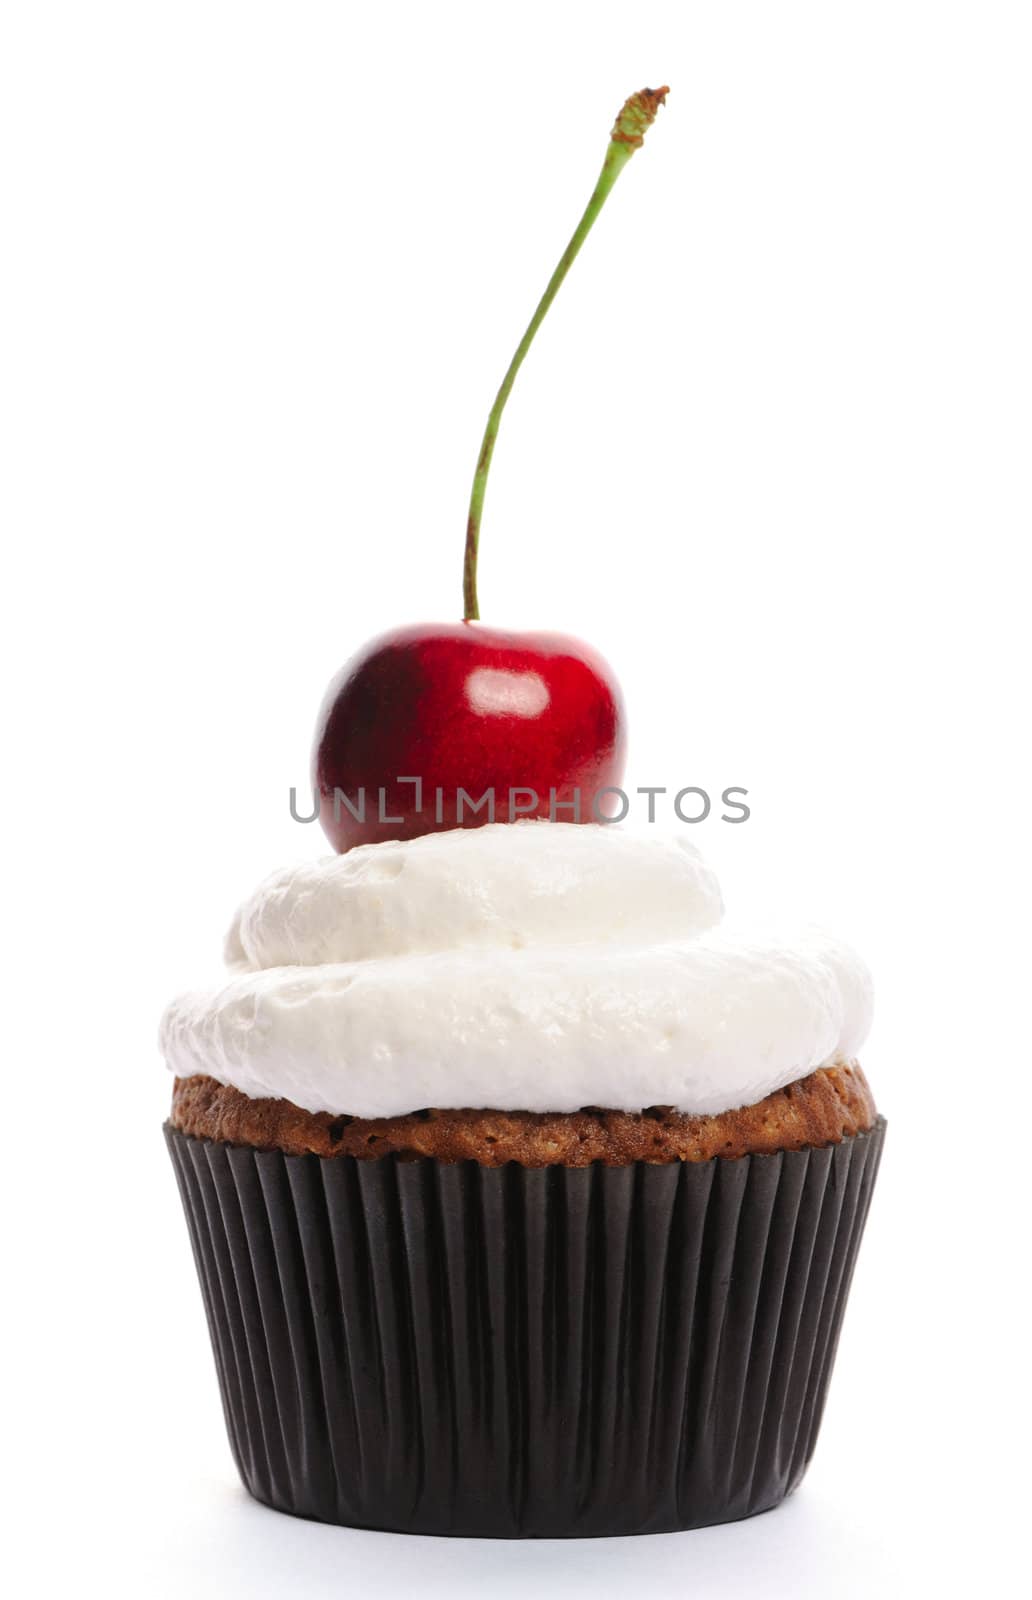 Cupcake with whipped cream and cherry by haveseen